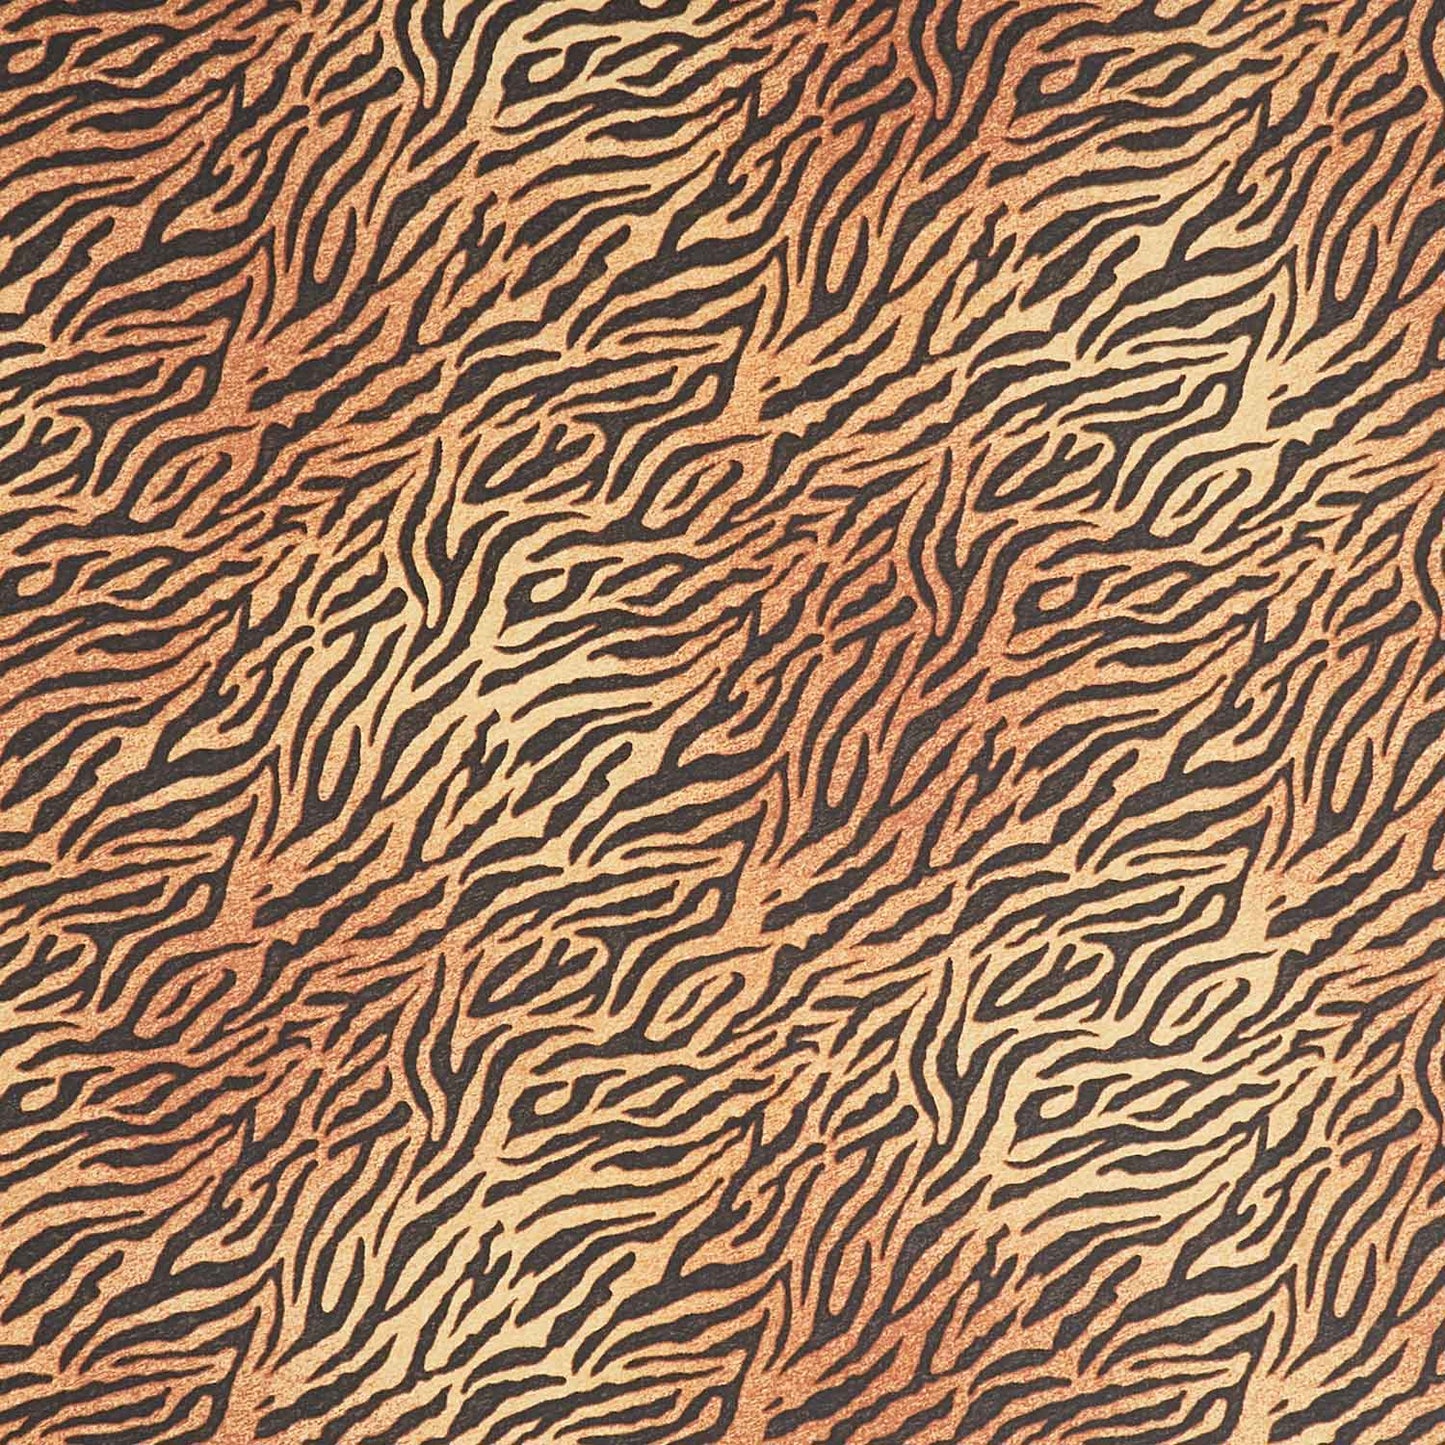 Naturescapes - Jungle Queen Tiger Skin Rust Black Yardage Primary Image